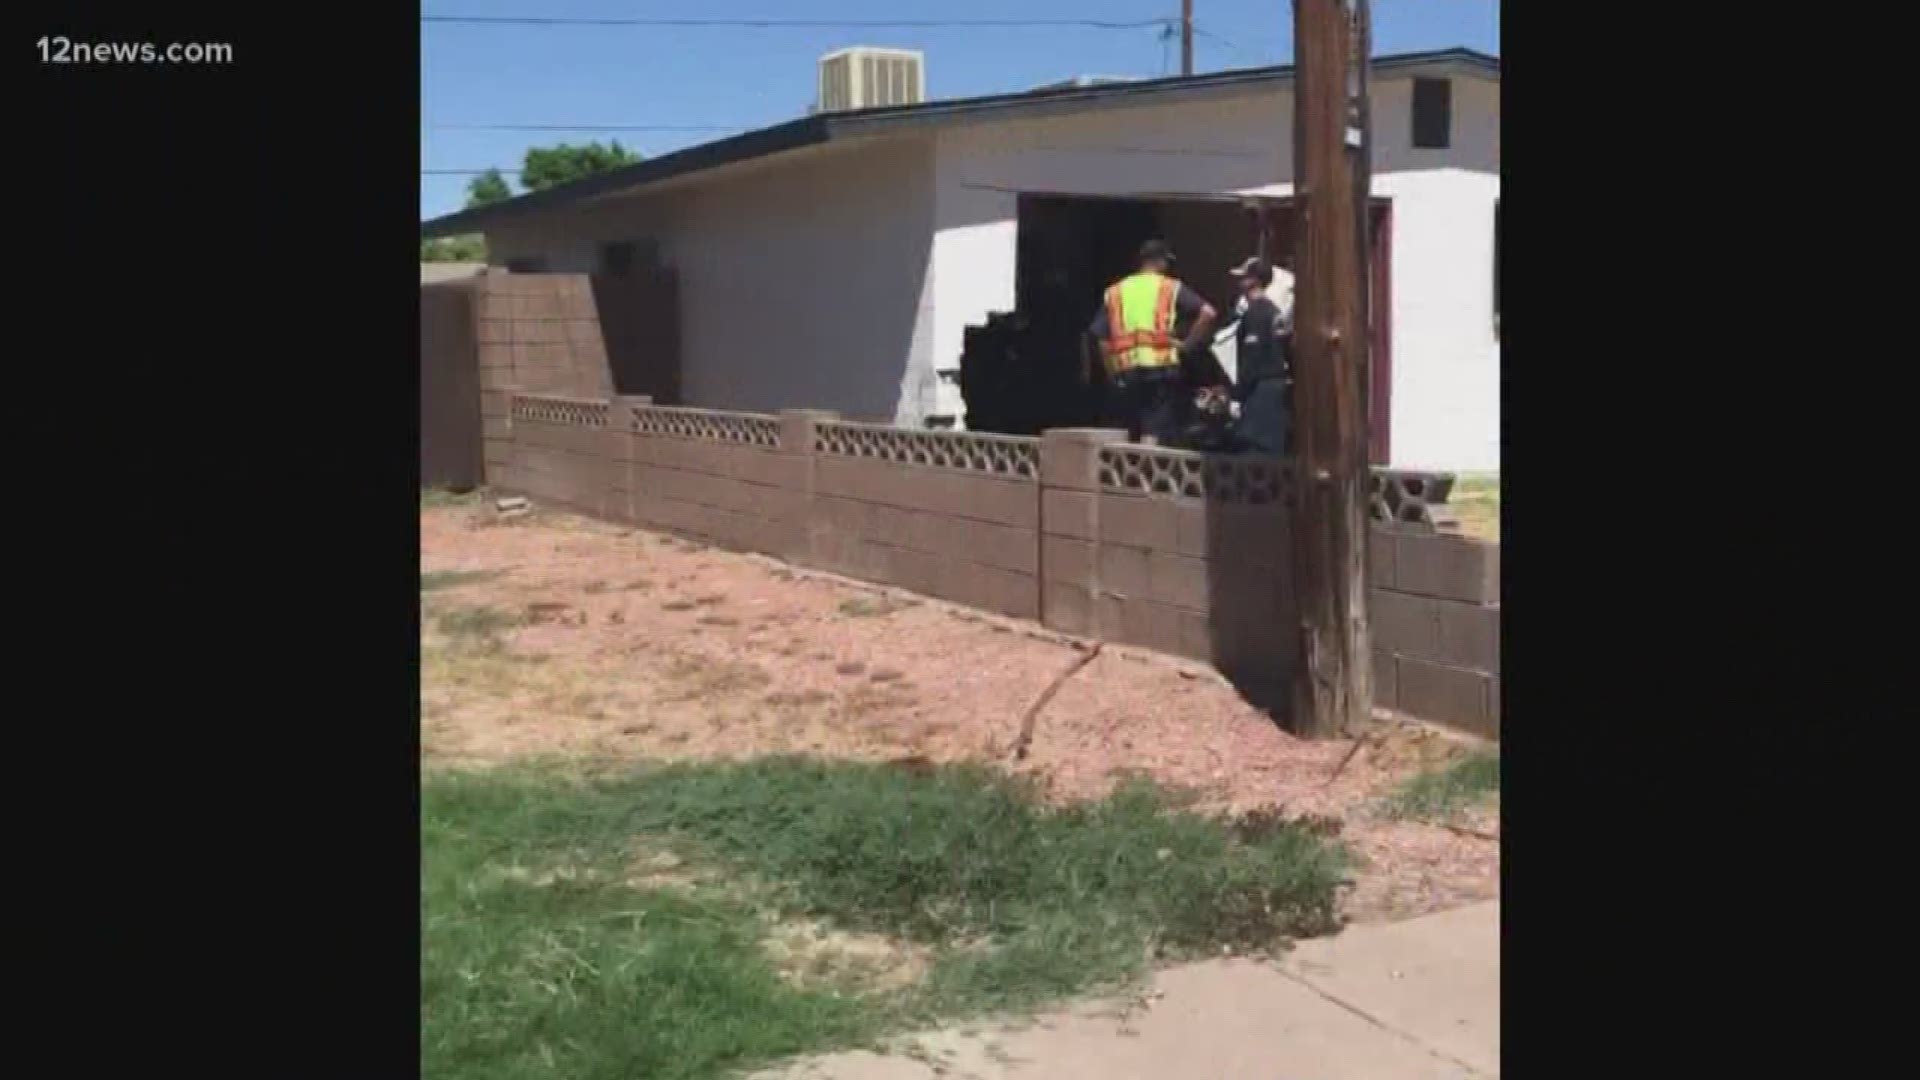 A woman captured video of the moment a car came plowing into her neighbor's home. Team 12's Antonia Mejia has the latest.